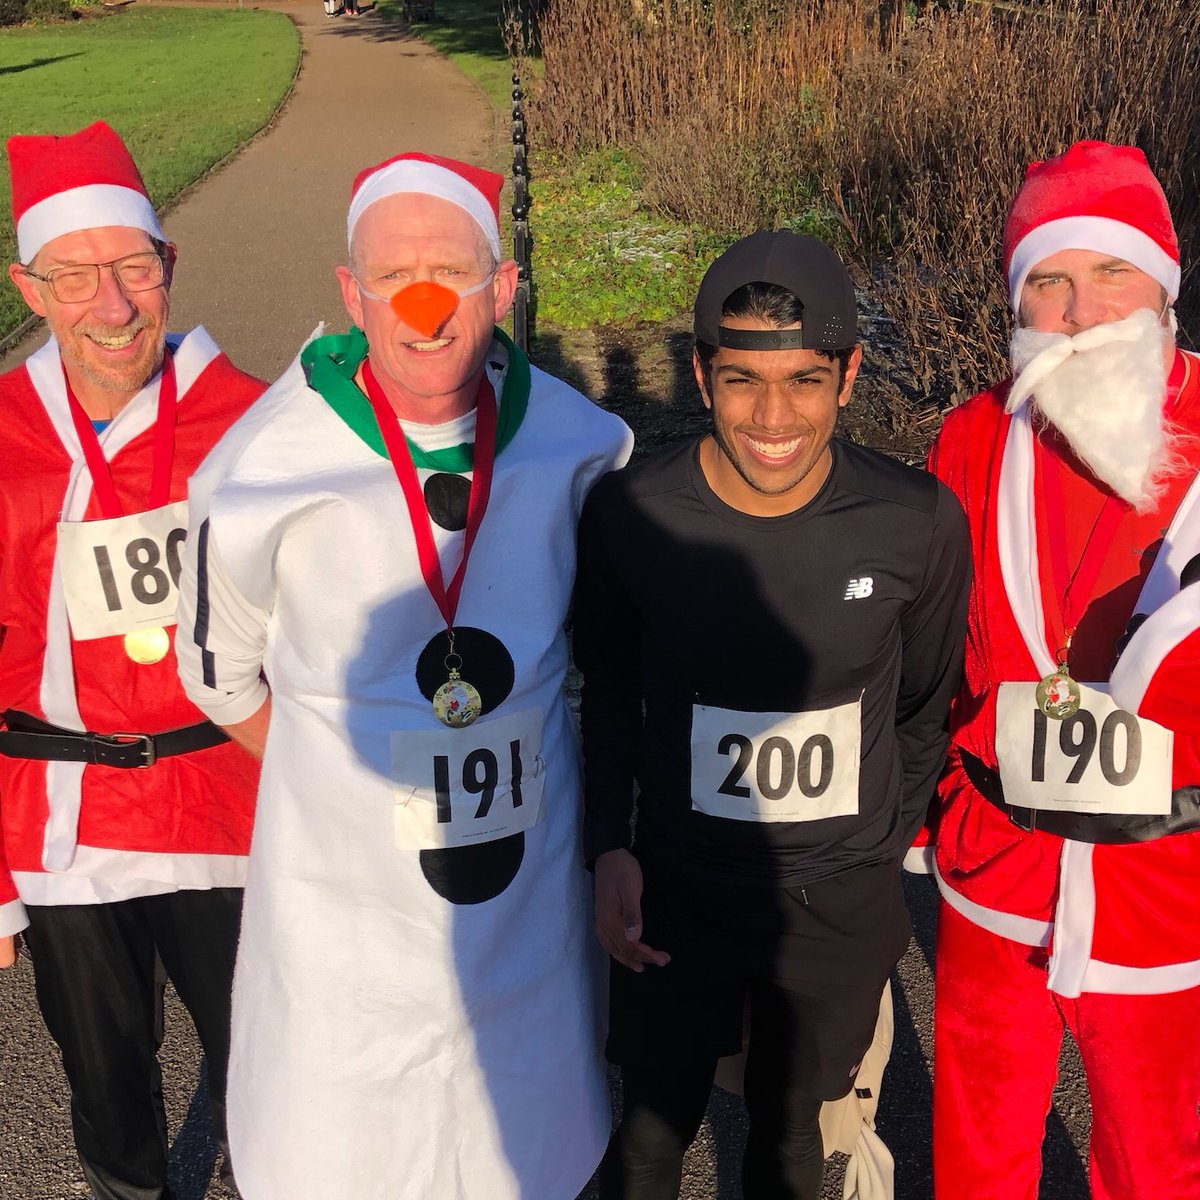 🎅🏃‍♀️ SANTA RUN & WALK- December 8th! Entries are now open 🎅🏃‍♂️ Dig out the Xmas jumpers. We're bringing some festive fun to Derby with our merry and memorable Santa Run or Walk. Don't miss out - sign-up here it's FREE ow.ly/eXT950Q3mJW 🏃‍♀️ @NeilFowler23 @RussellLewis24